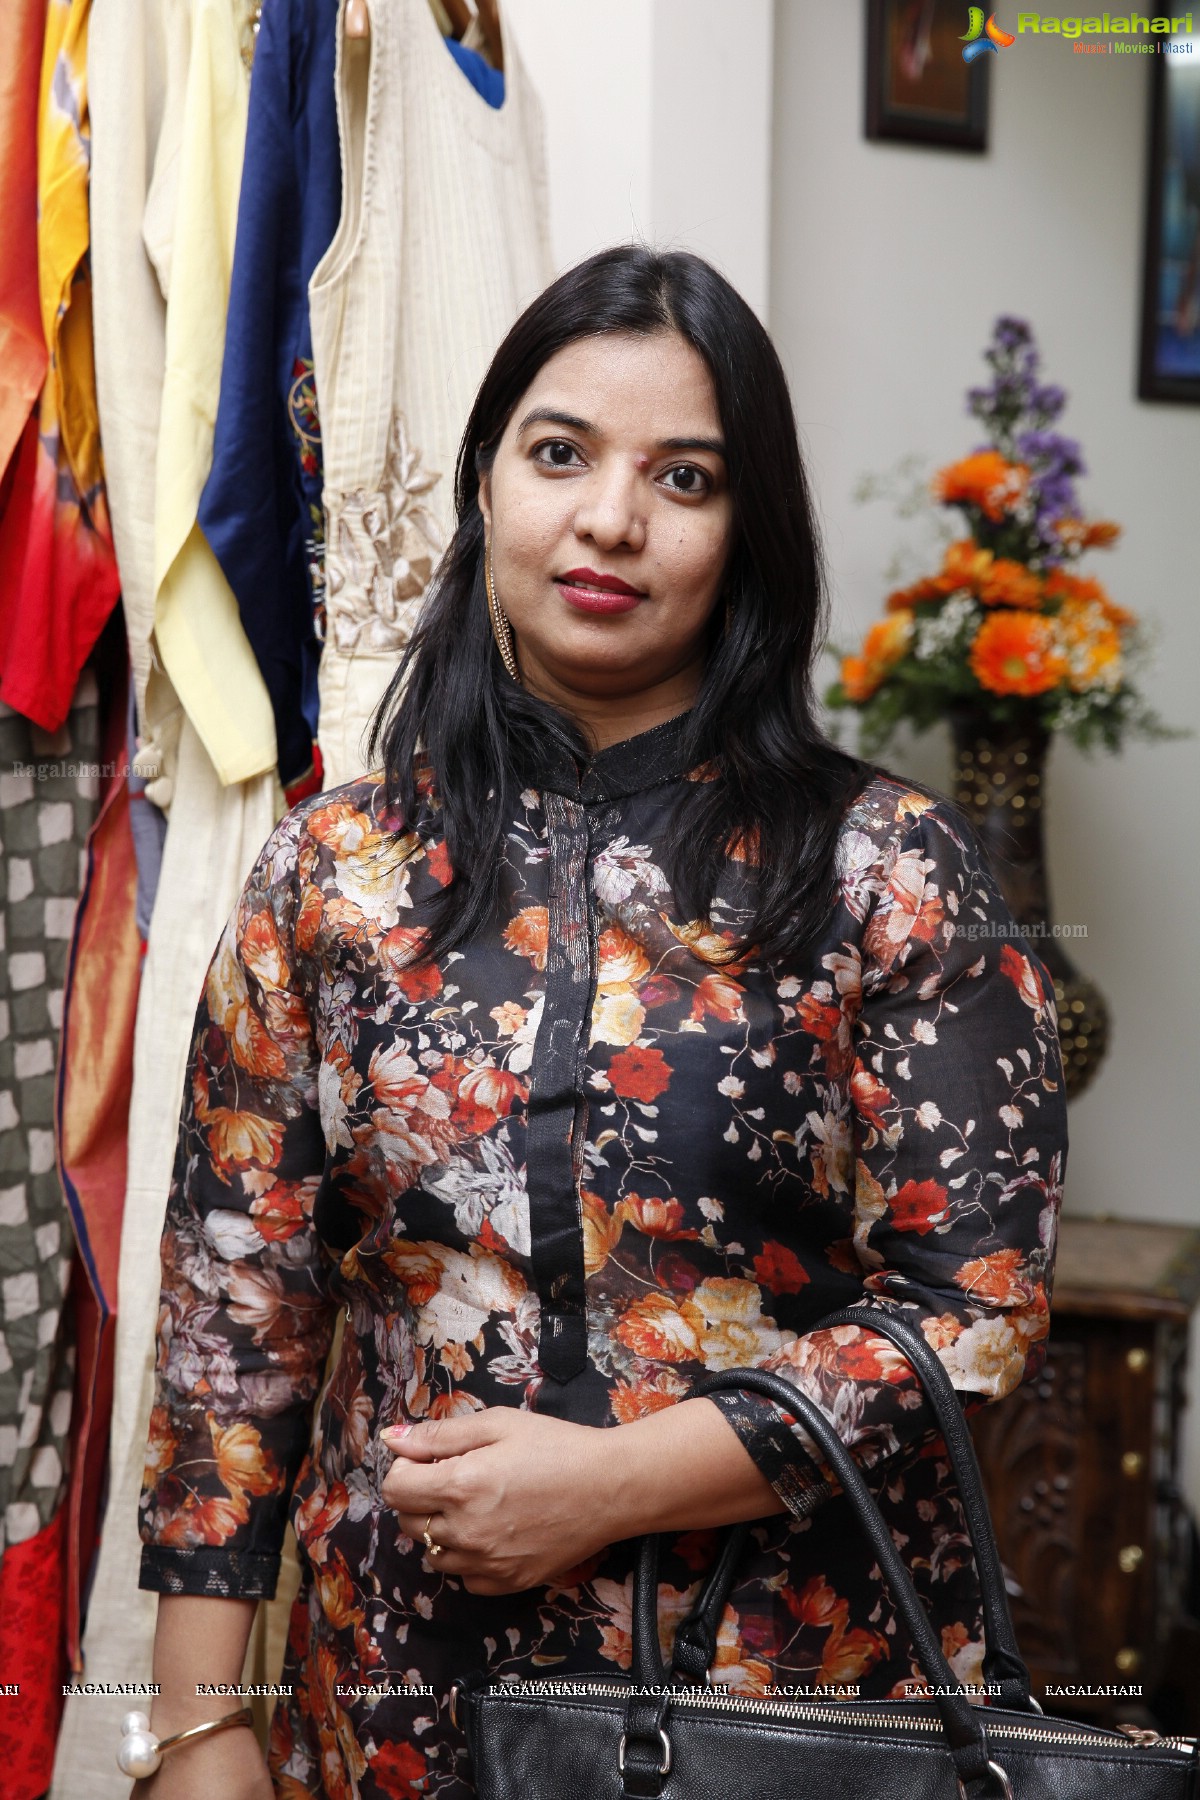 Kali - The Boutique 1st Anniversary Celebrations and Launch of Designer Jewellery by Nidhi Lodha